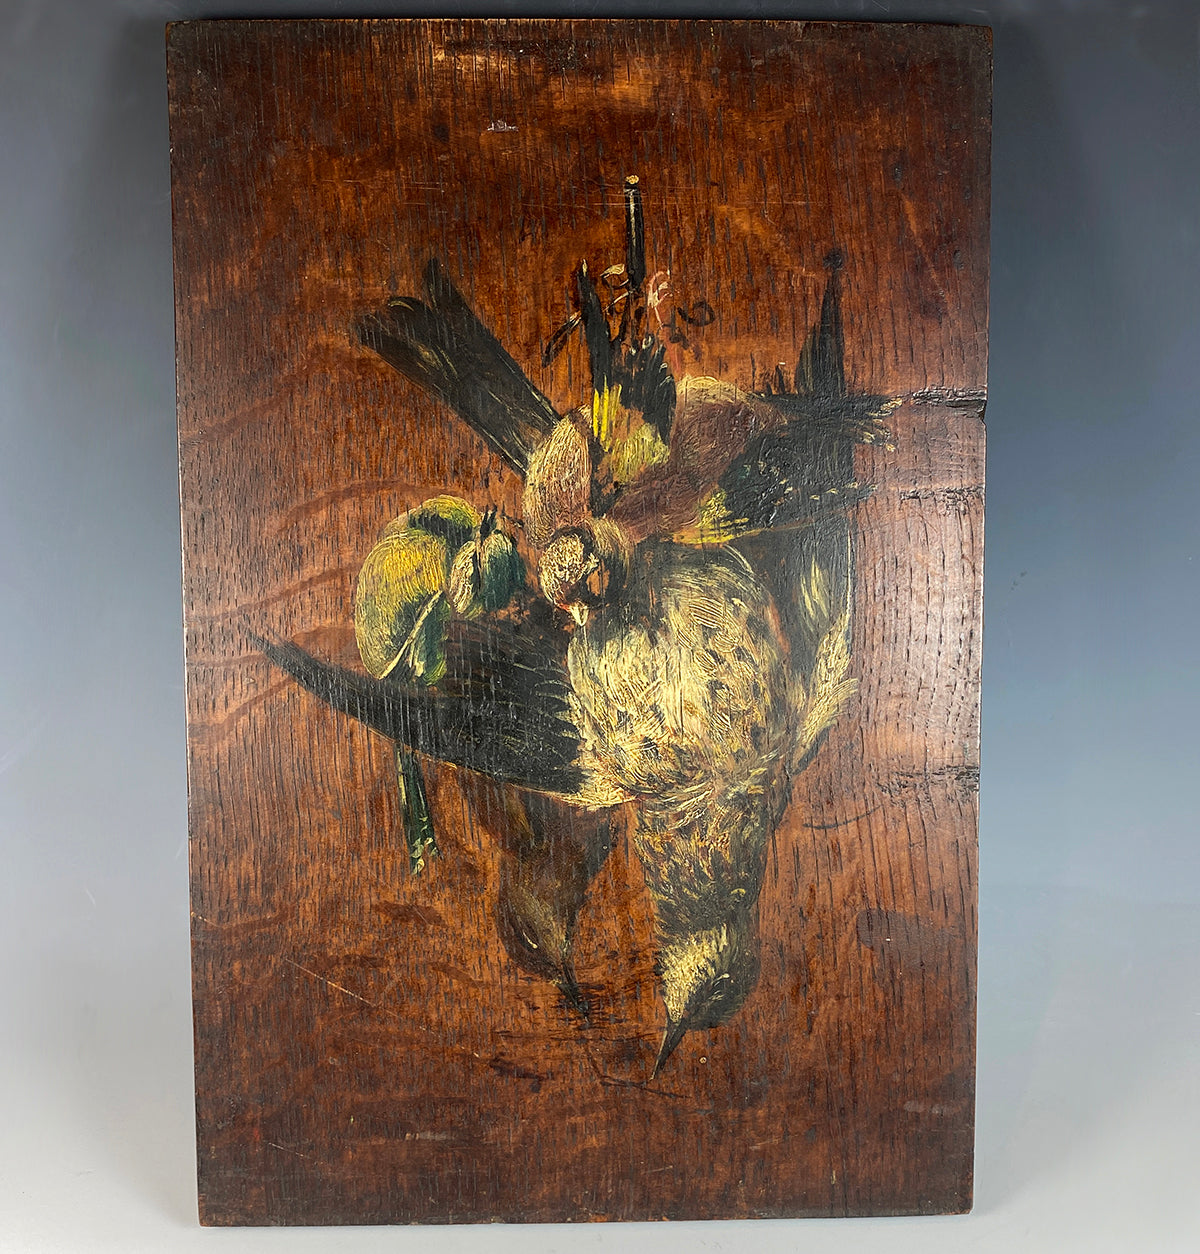 Set of 4 Antique French Oil Paintings on Wood Board, Nature Morte, Still Life, Trompe-l'œil Game Birds